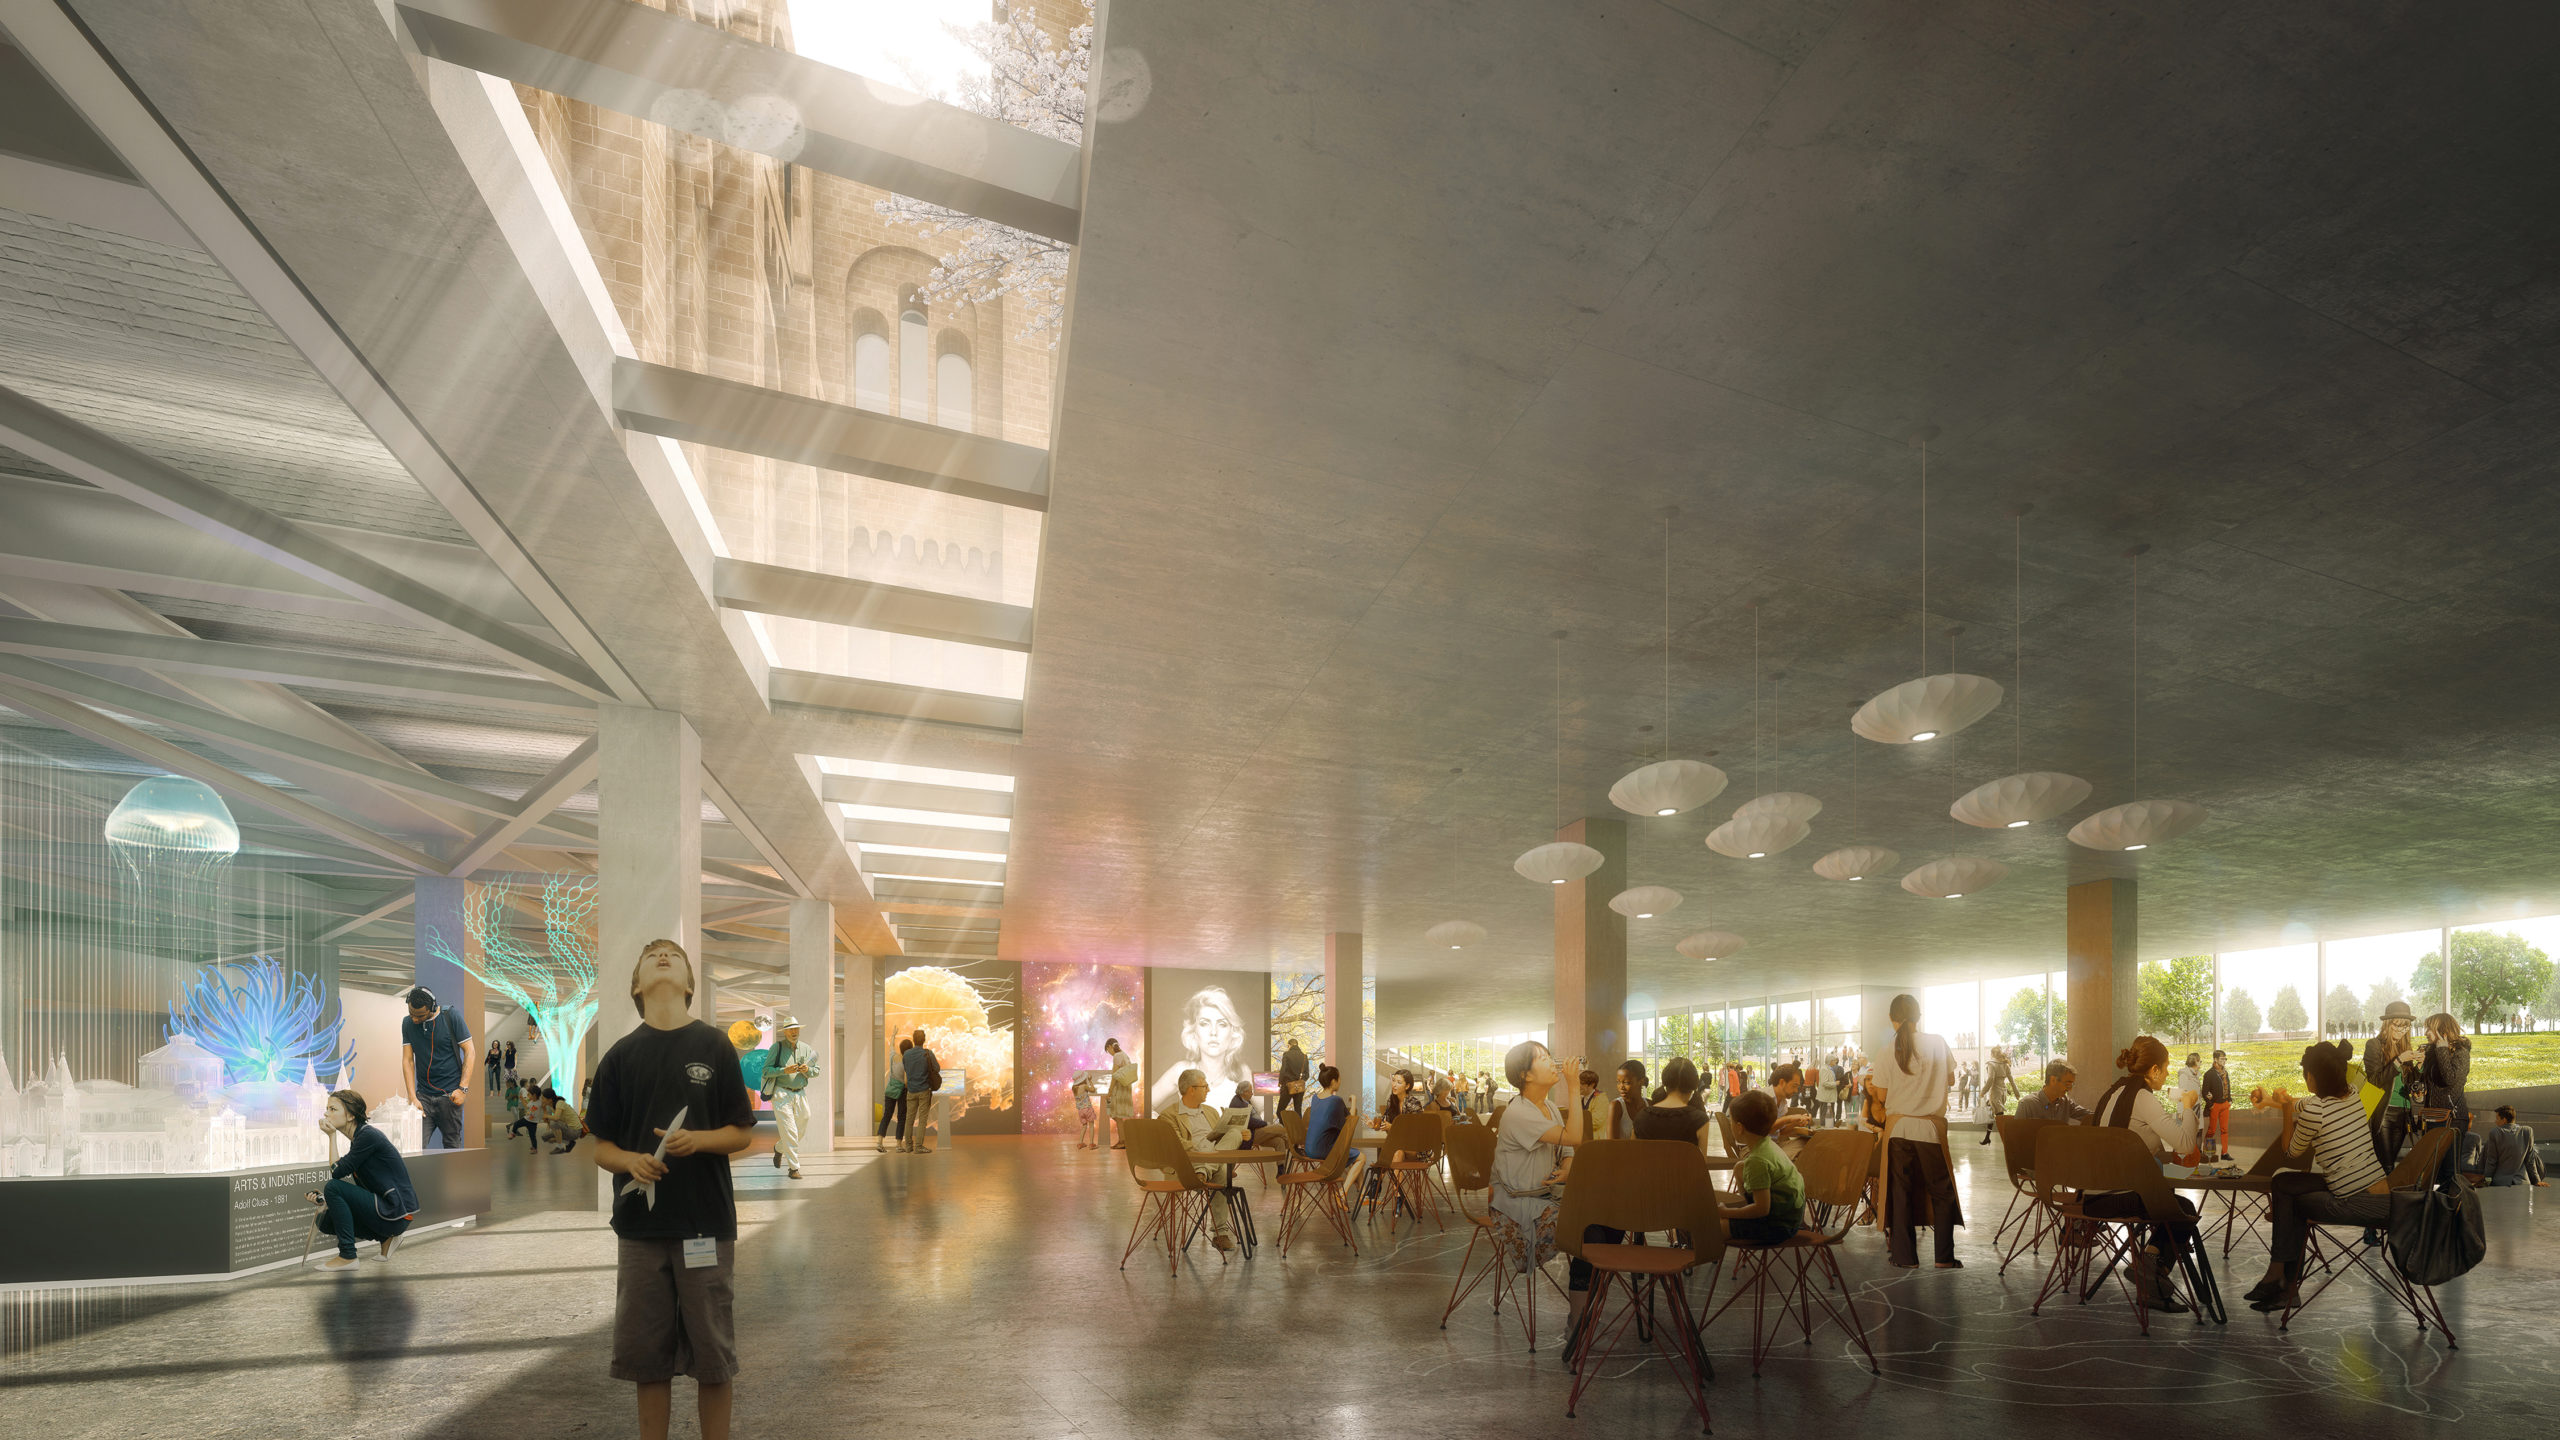 The Smithsonian’s Fantastic Plan To Transform The National Mall